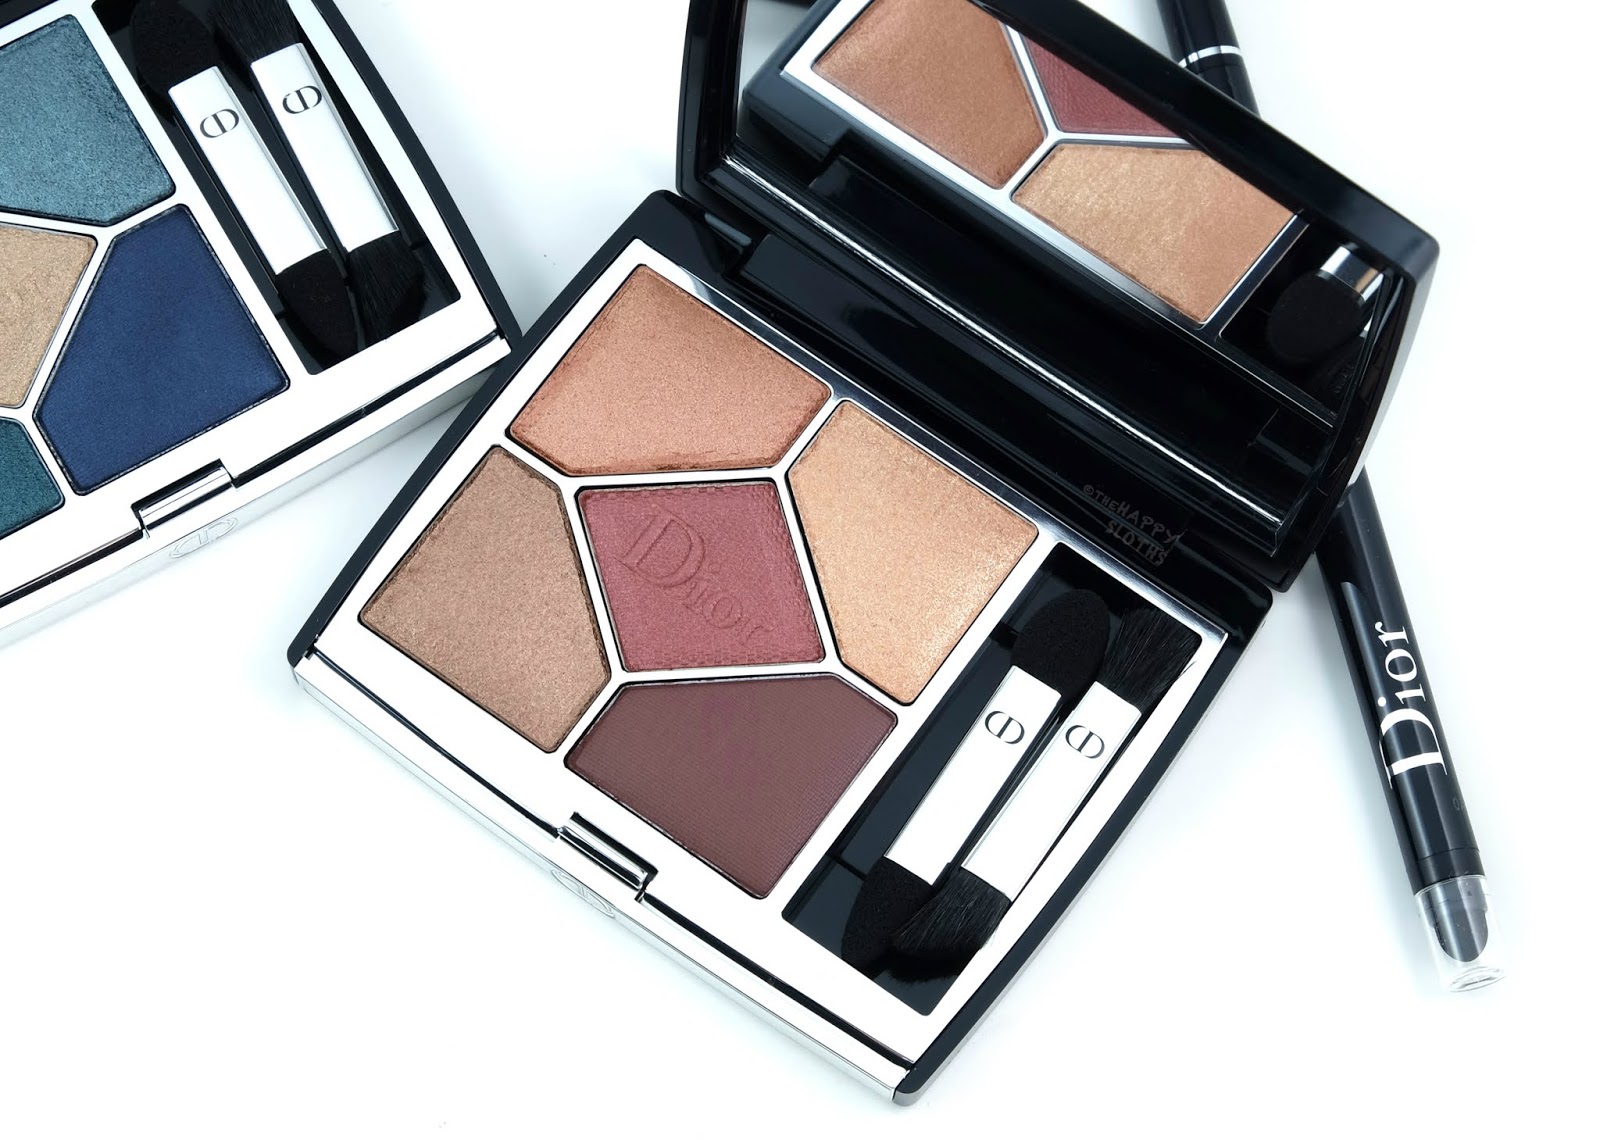 Dior | 5 Couleurs Couture Eyeshadow Palette in "689 Mitzah": Review and Swatches